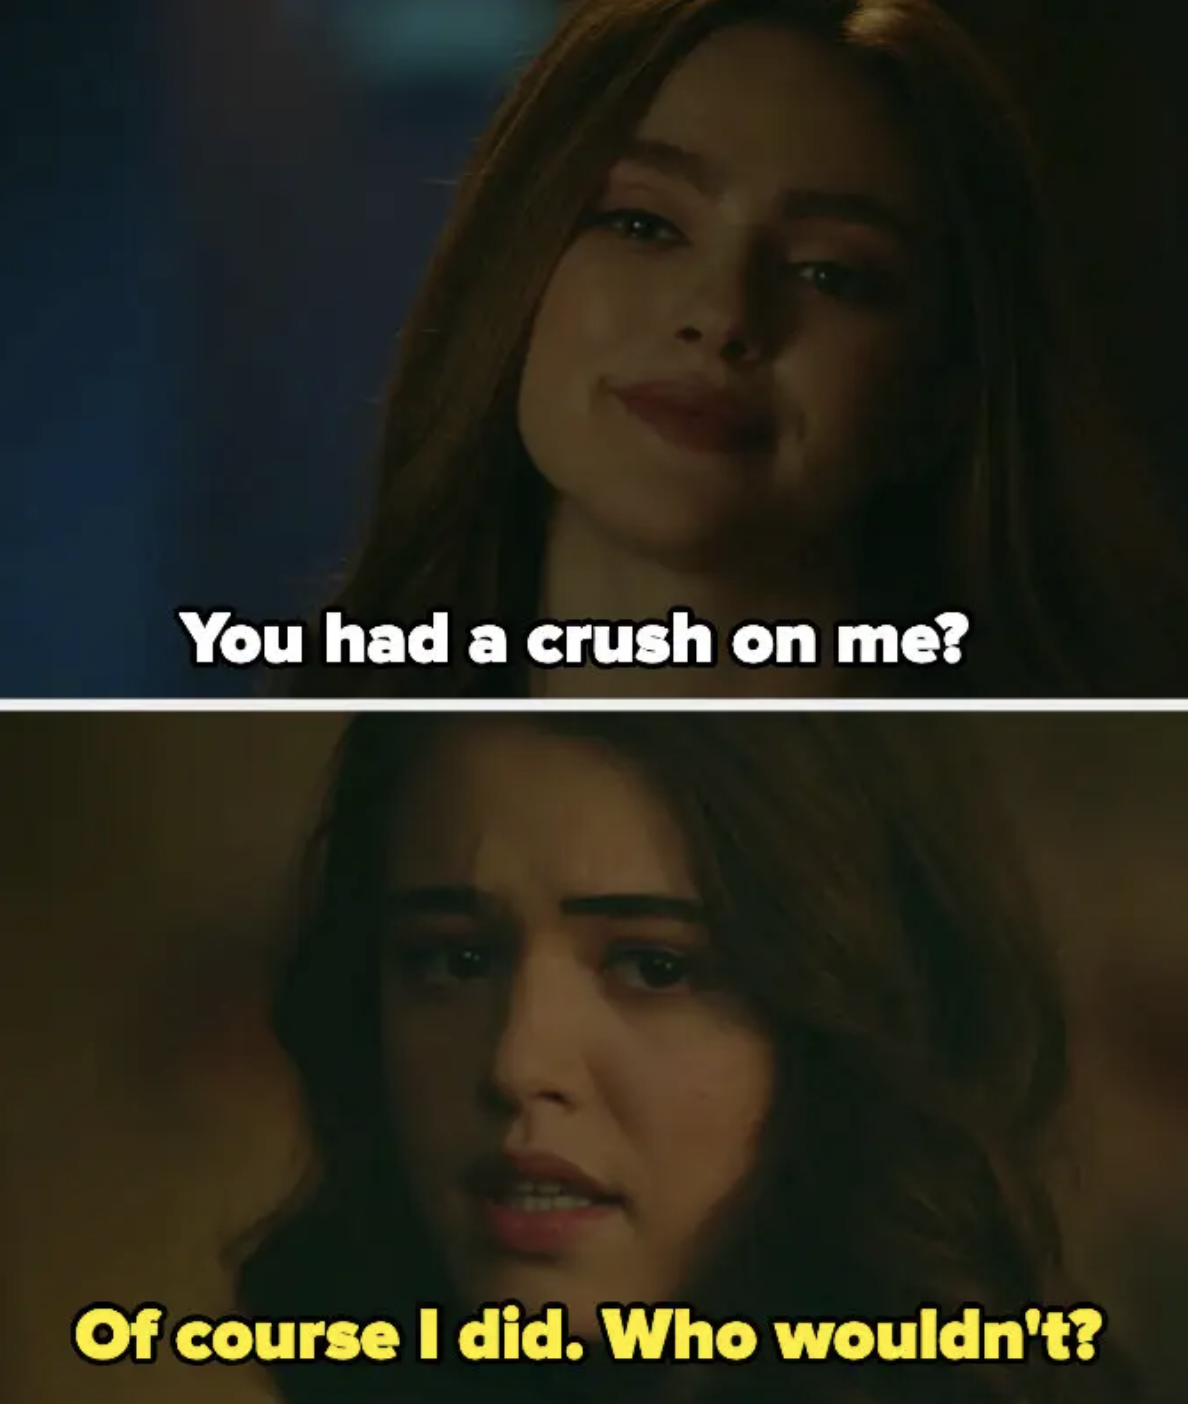 Hope: &quot;You had a crush on me?&quot; Josie: &quot;Of course I did&quot;